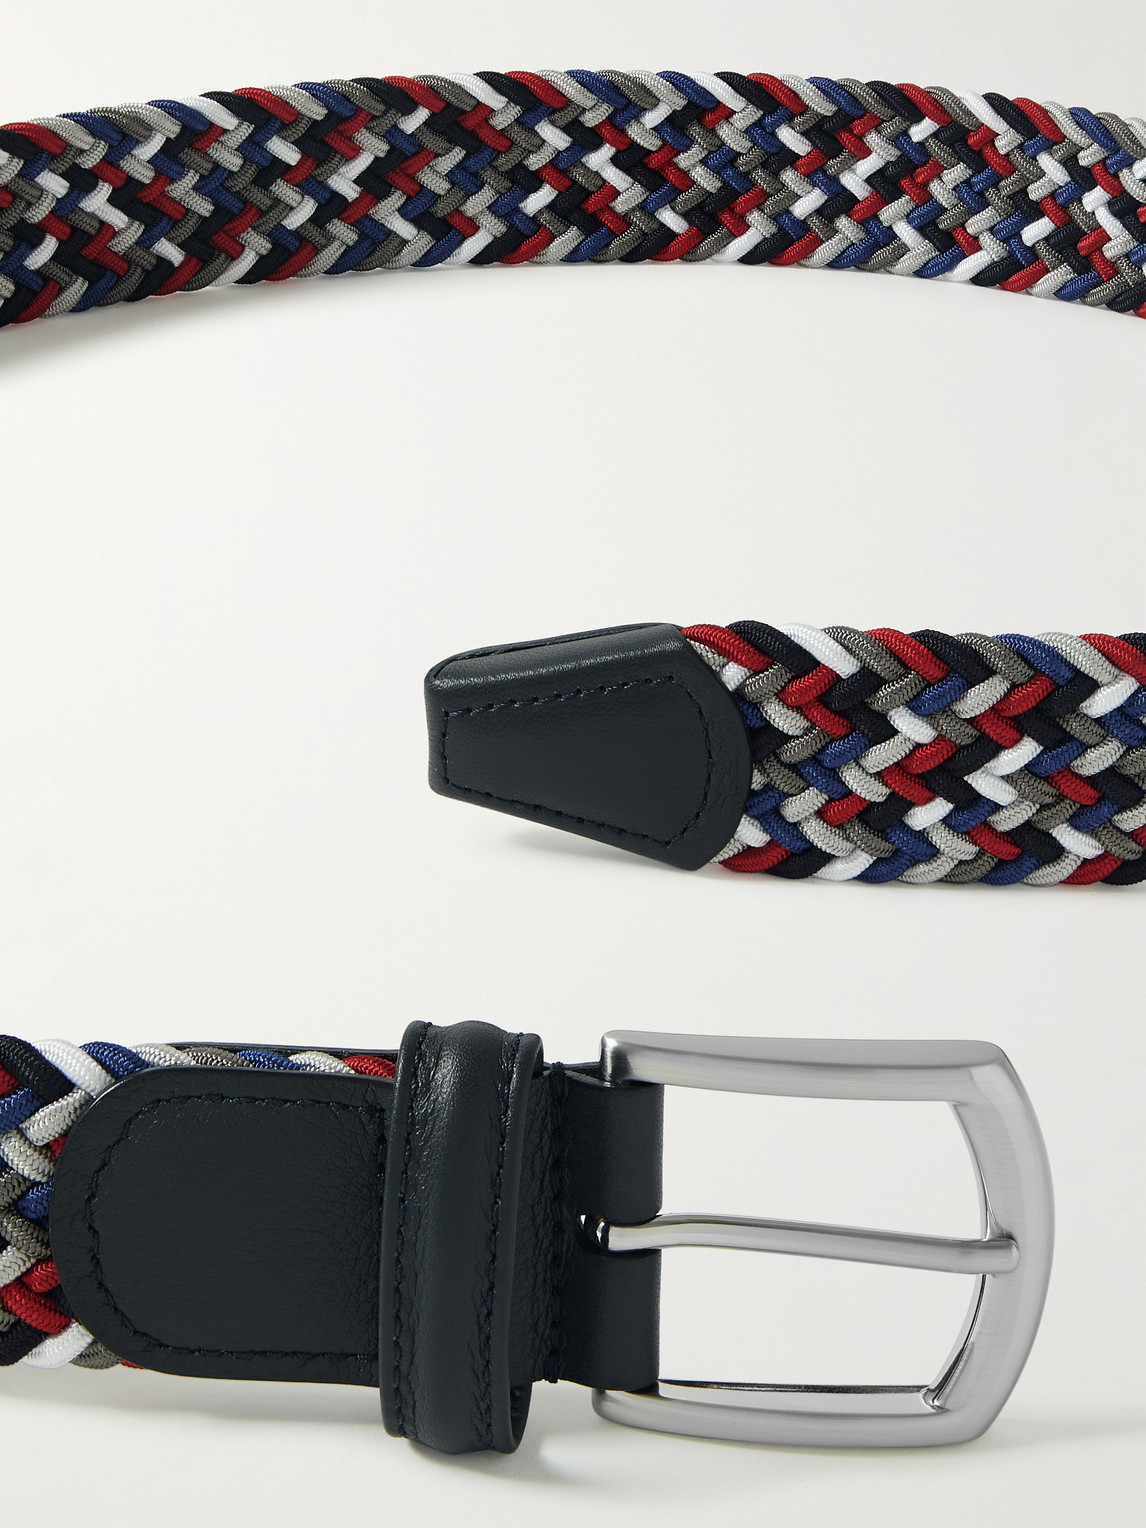 ANDERSON'S 3.5CM LEATHER-TRIMMED WOVEN ELASTIC BELT 